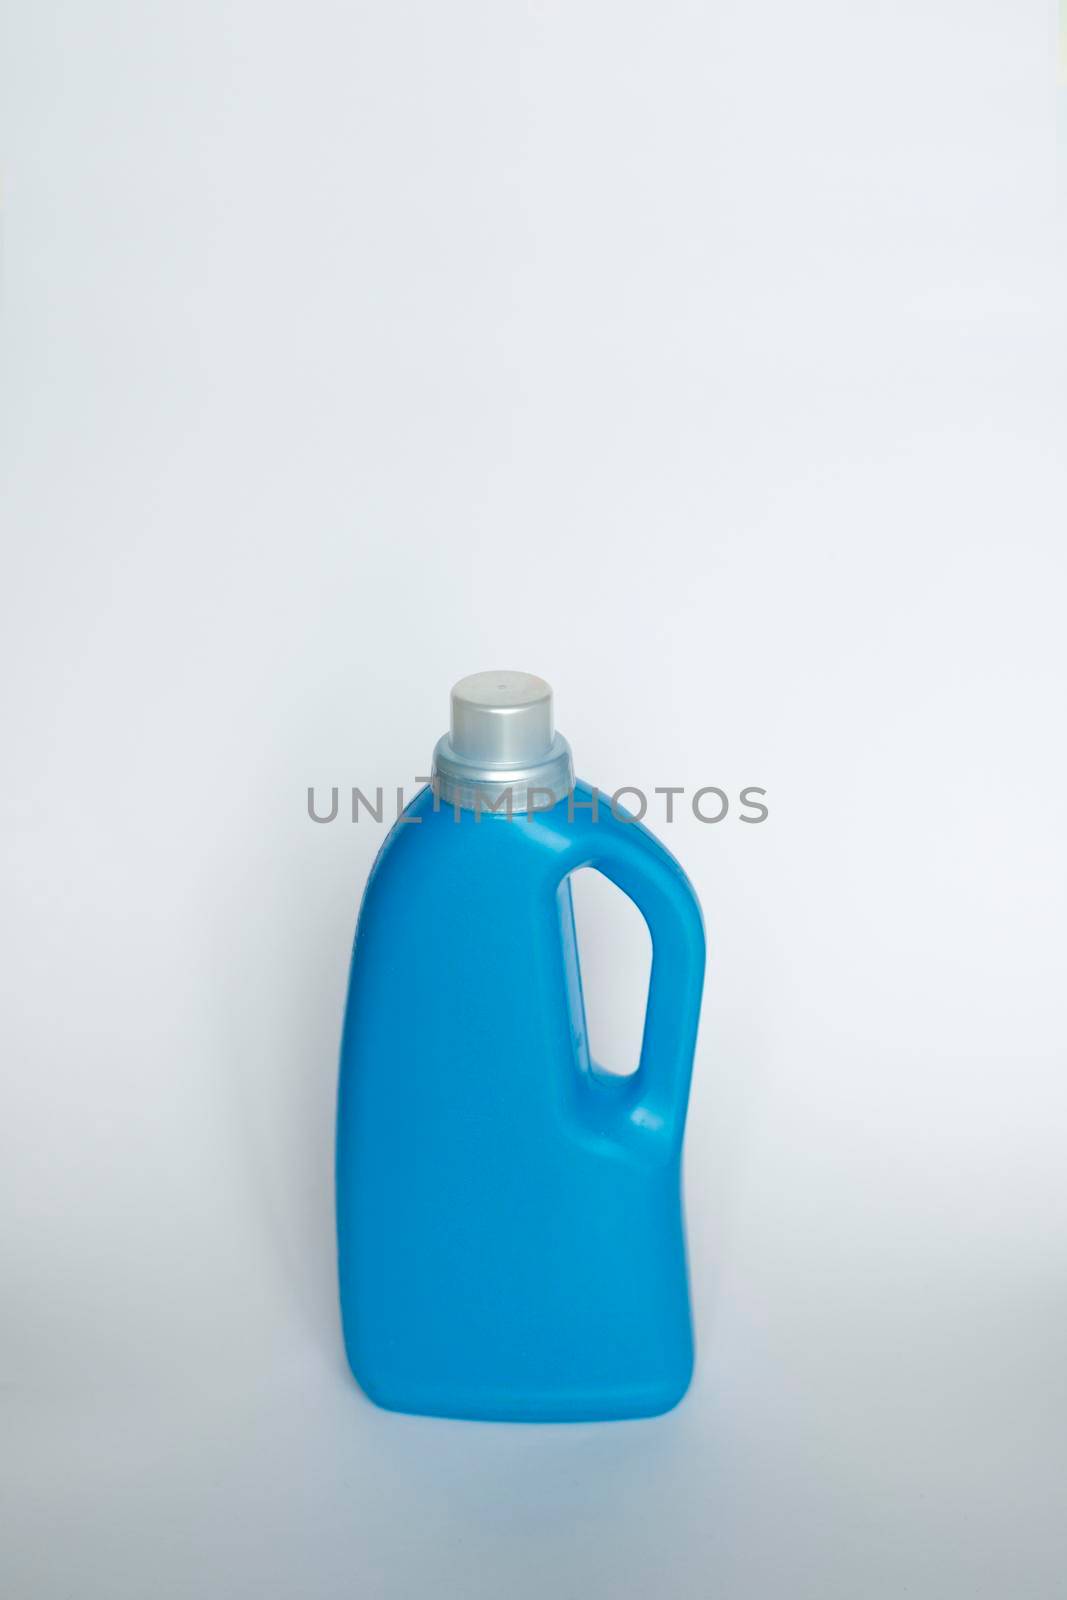 Blue plastic bottle stands on white background. Conditioner or liquid powder for washing. Capacity with space for copying. Layout for logo application. by vovsht